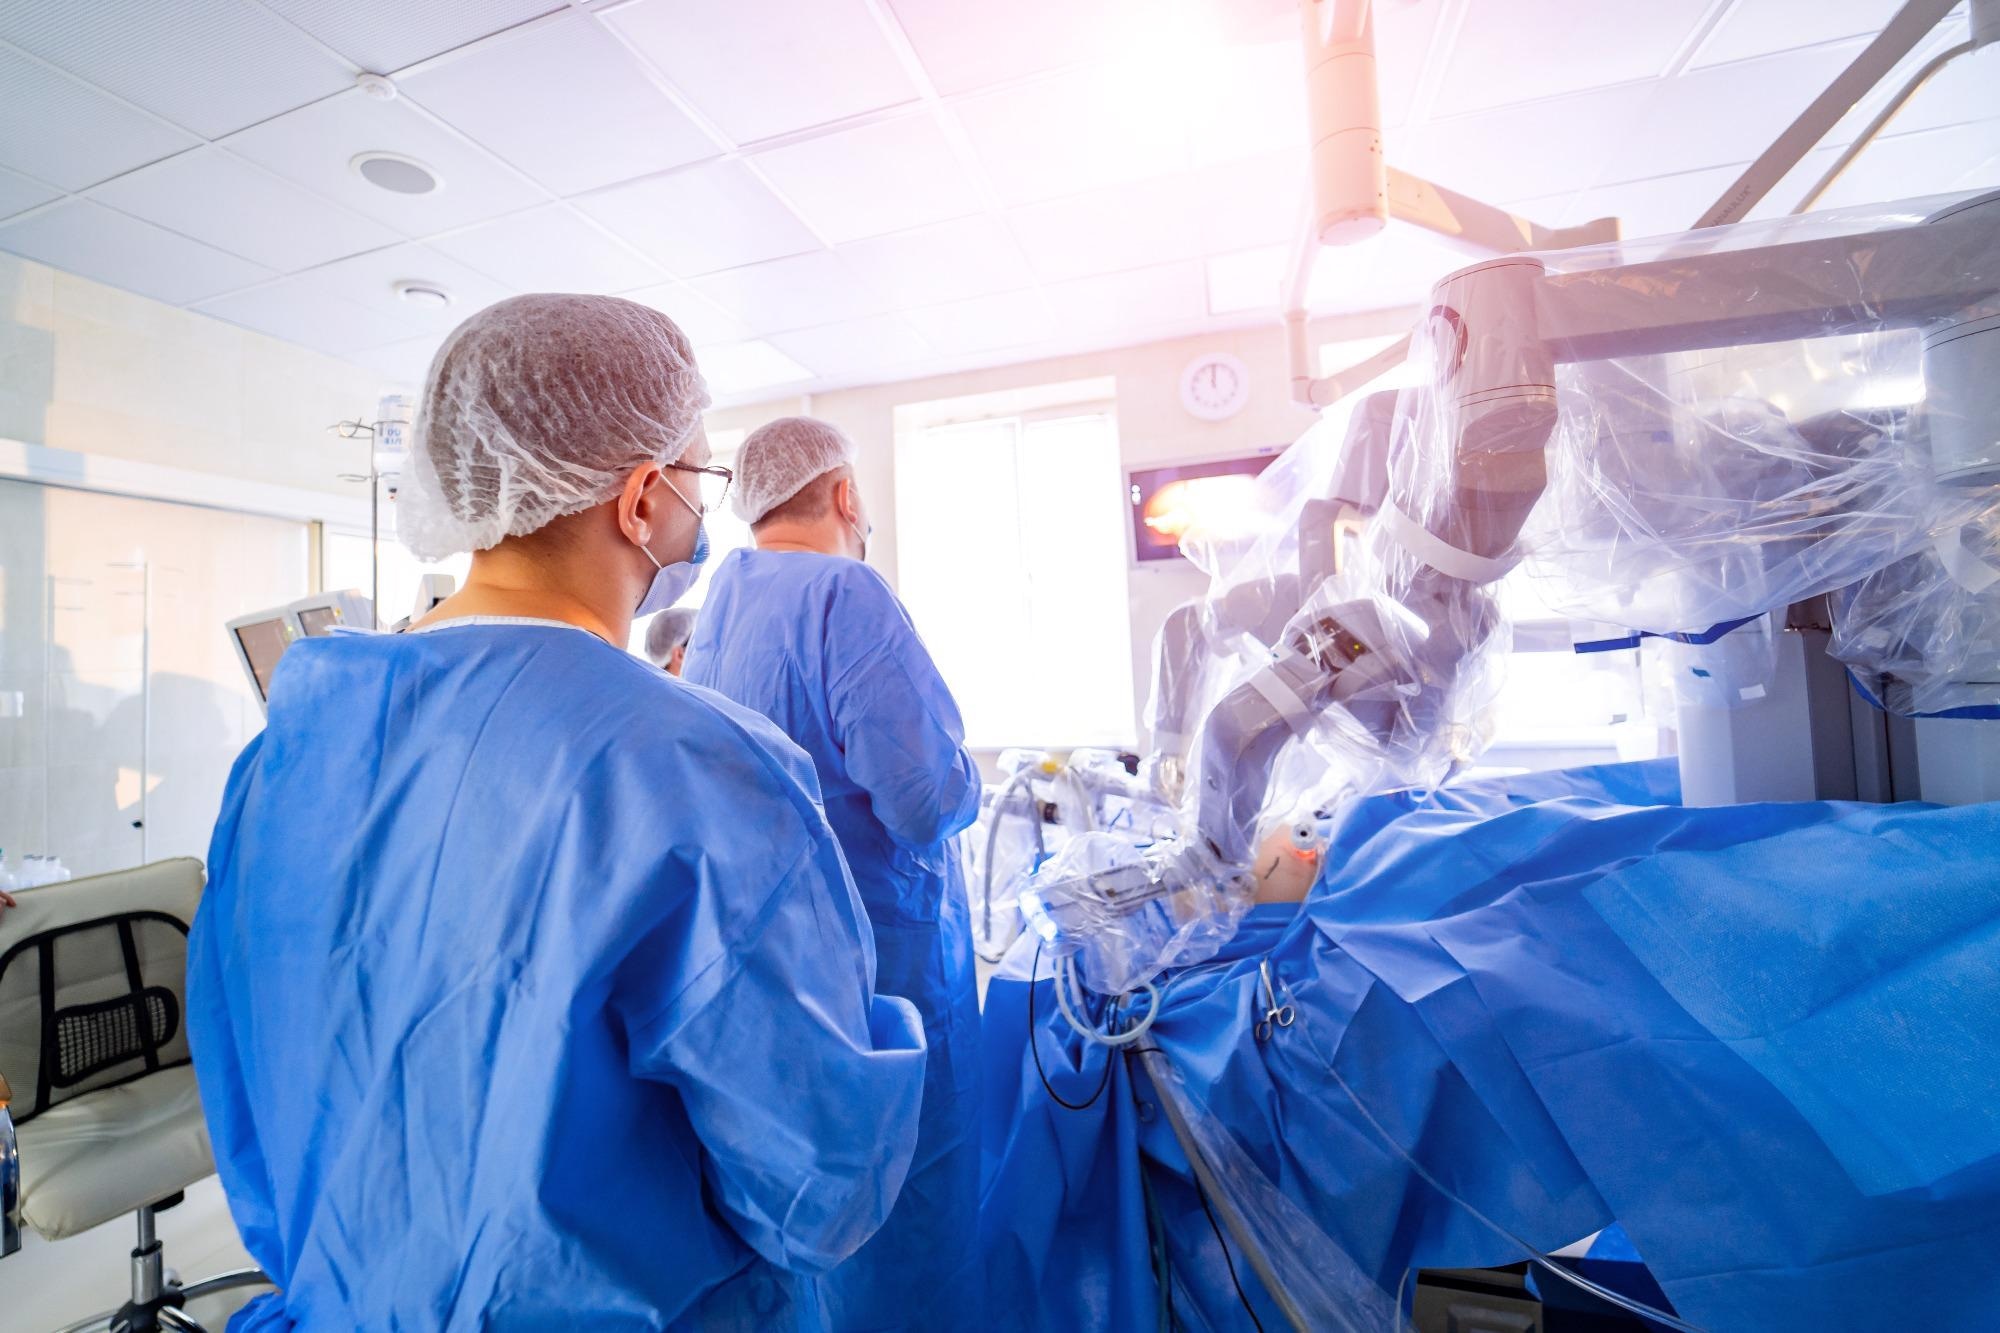 Robot-Assisted Surgery Becomes a Reality